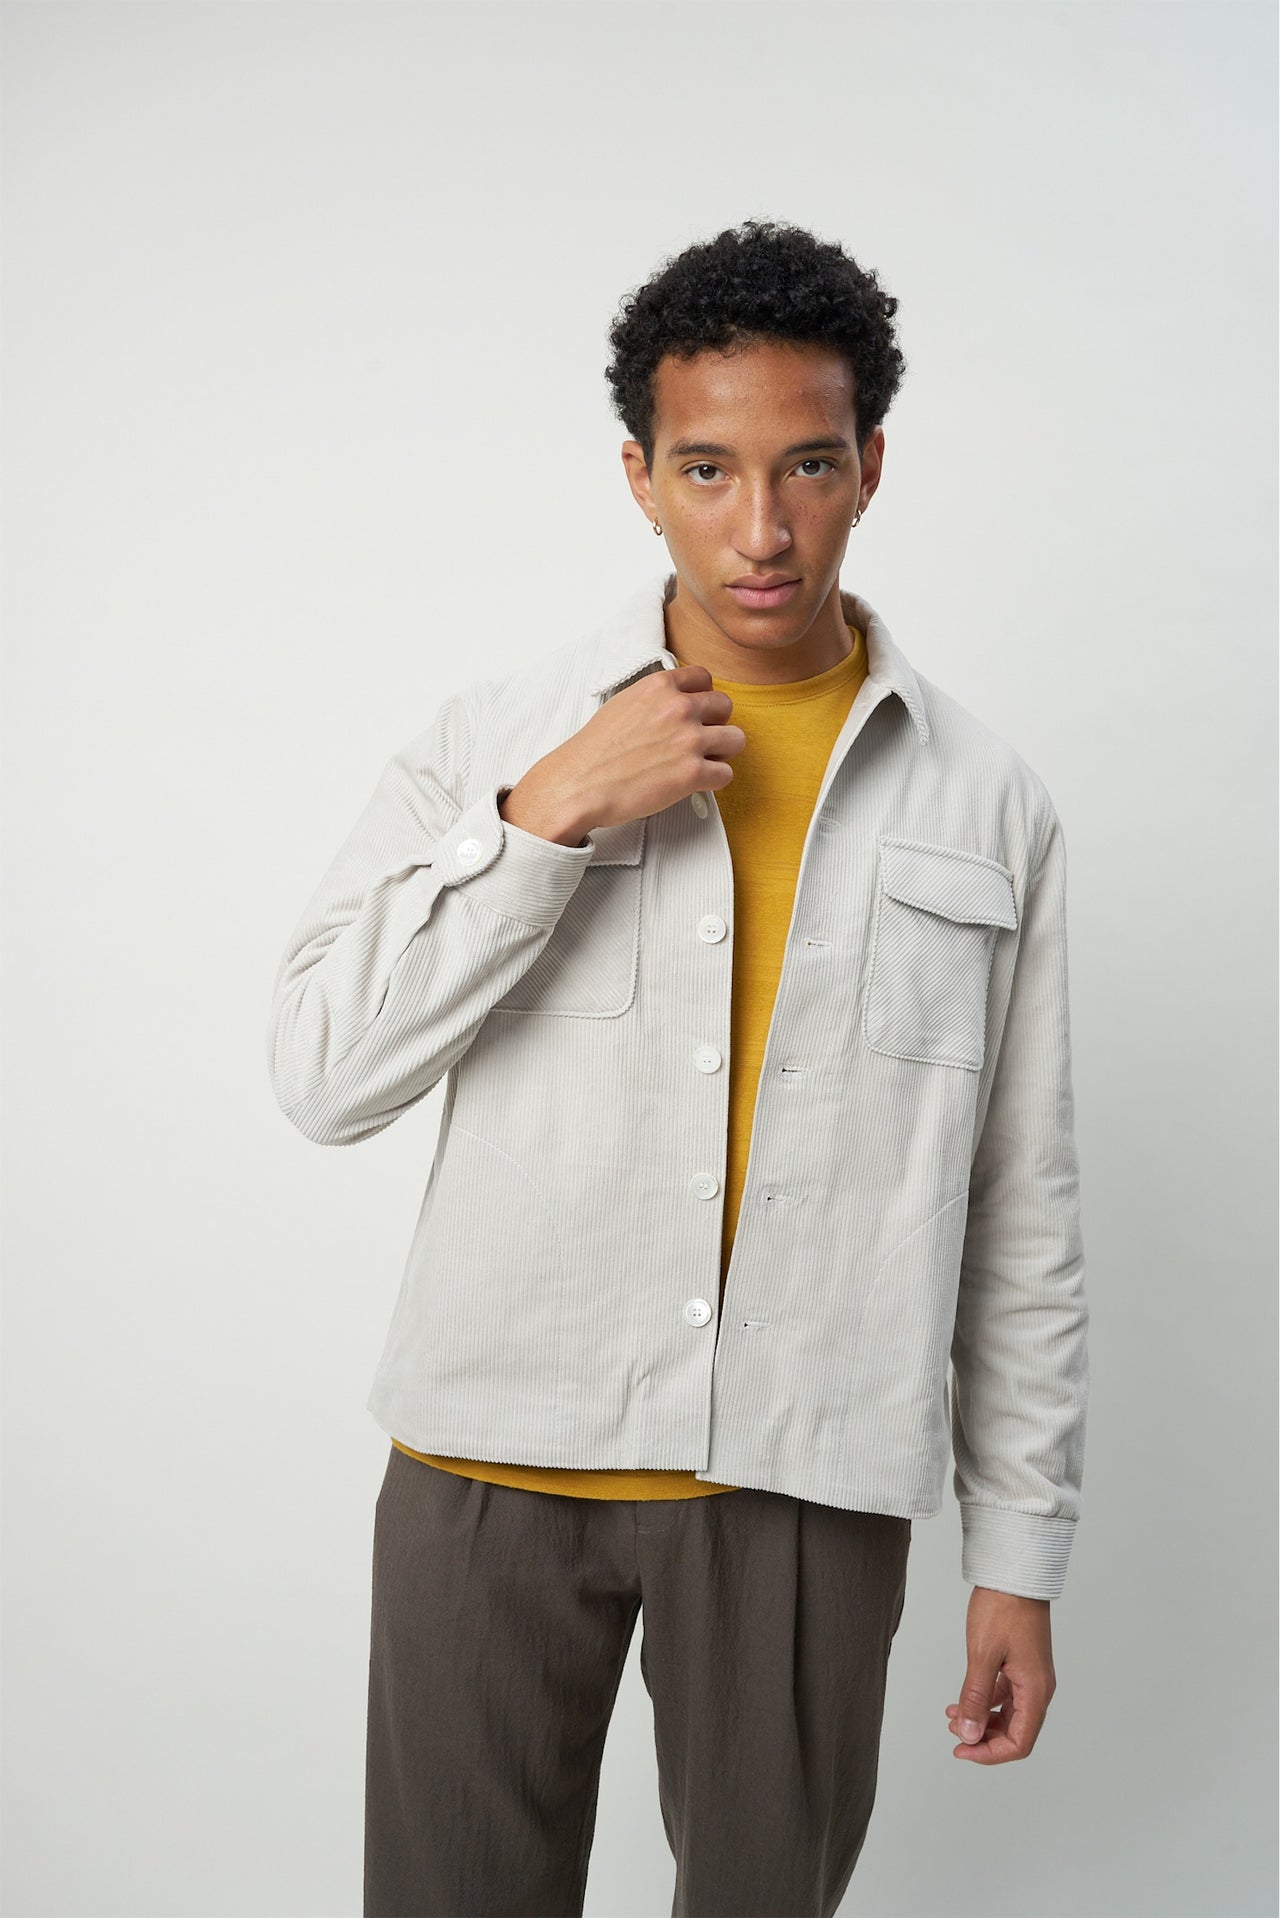 Jacket in a Flat White Japanese Corduroy Cotton with MEIDA Thermo Insulation